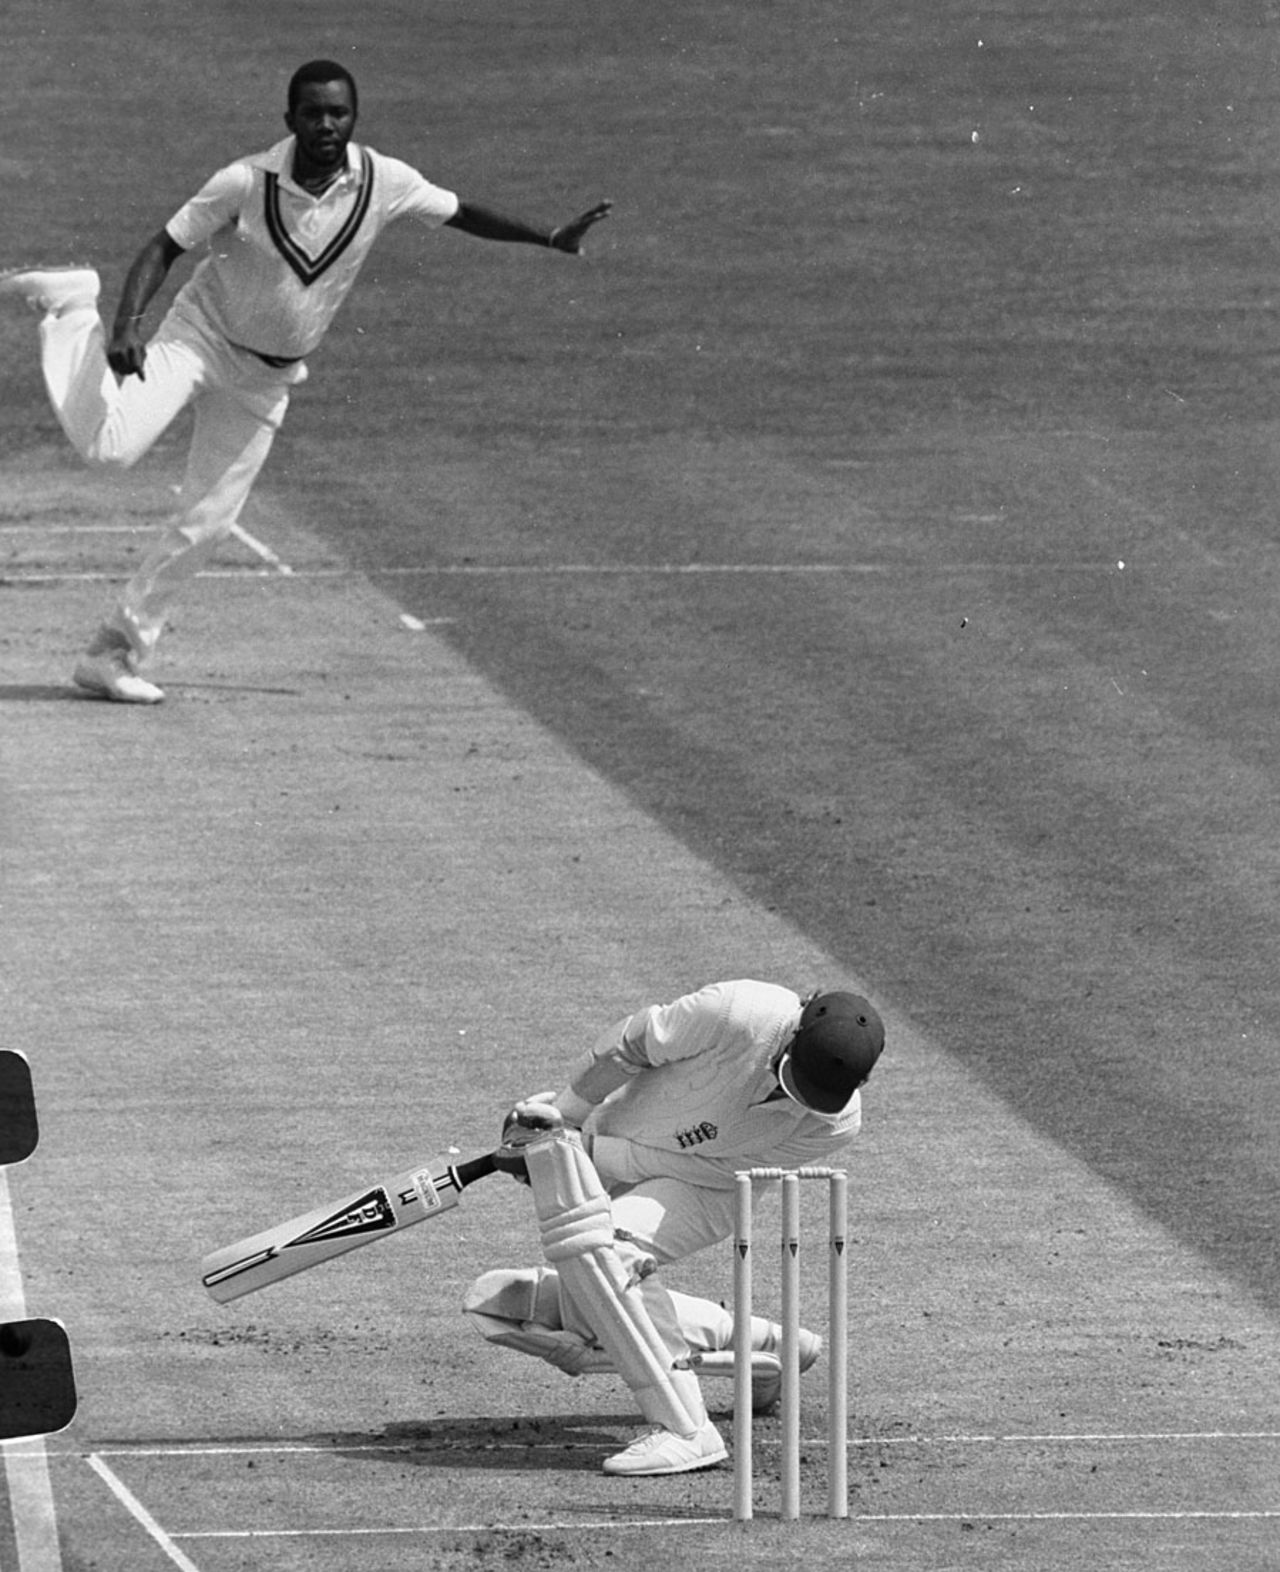 Andy Lloyd tries to unsuccessfully avoid a Malcolm Marshall bouncer, England v West Indies, Edgbaston, 1984